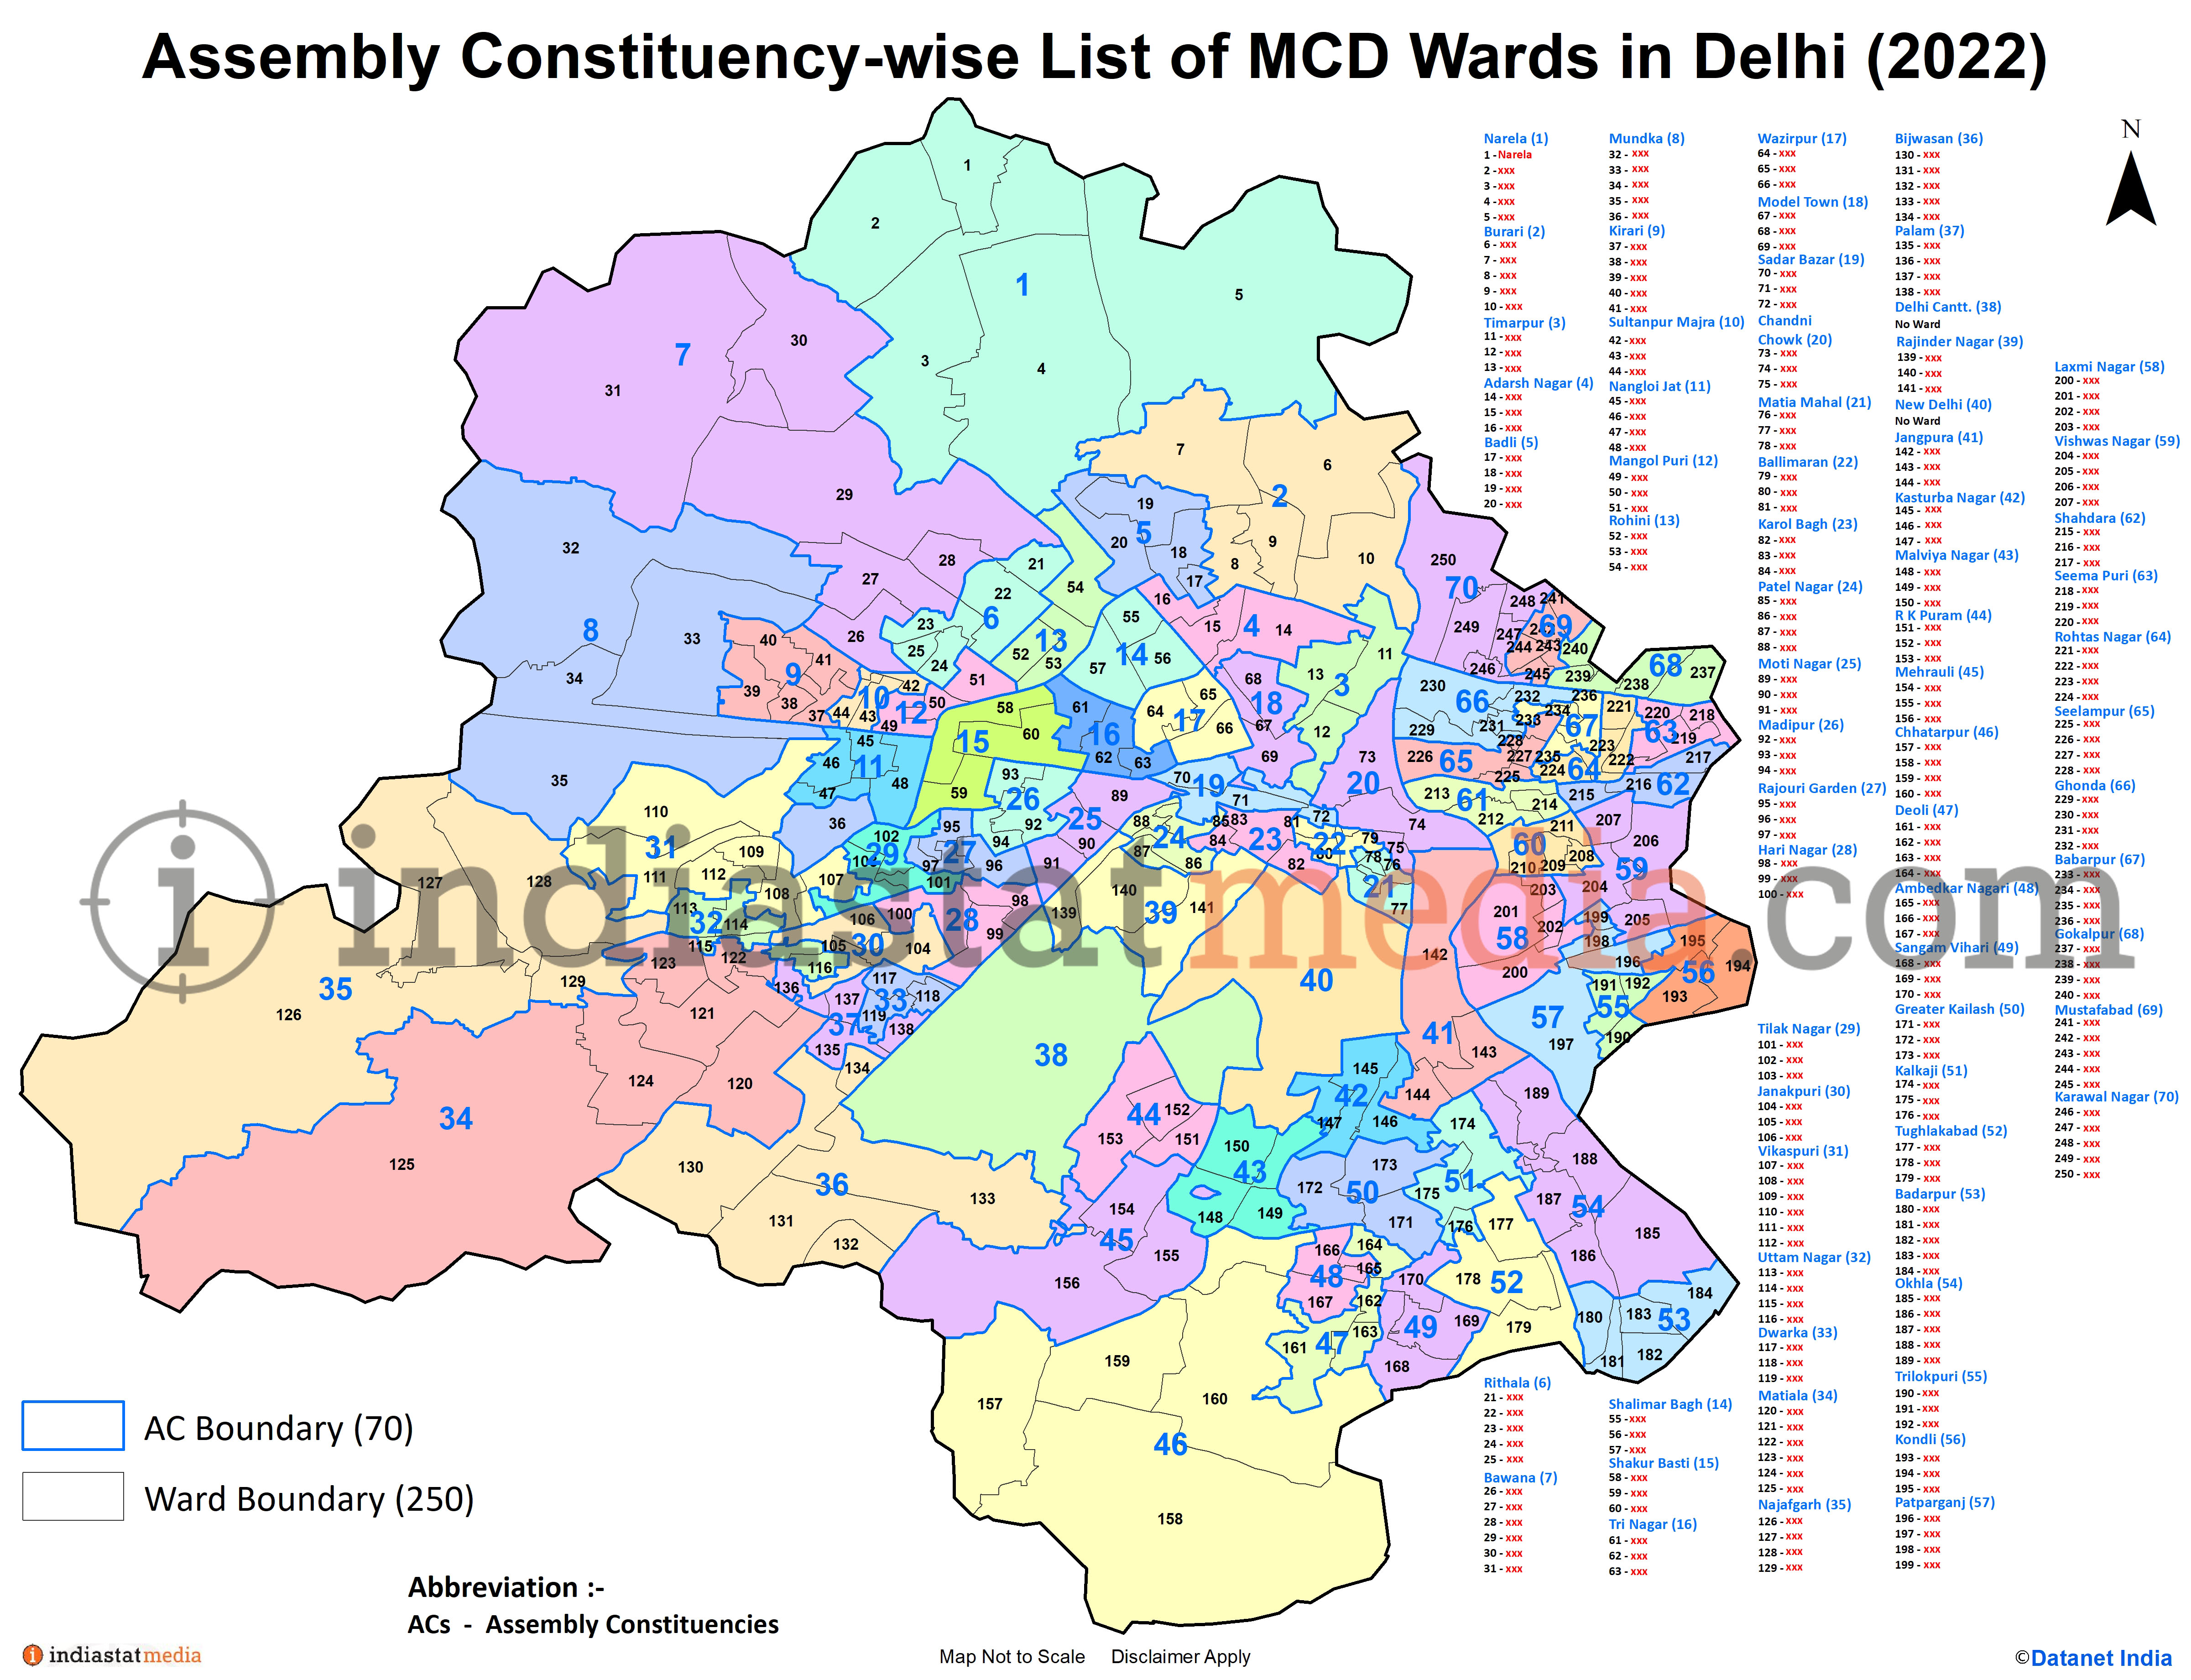 Assembly Constituency - wise List of MCD Wards in Delhi (2022)